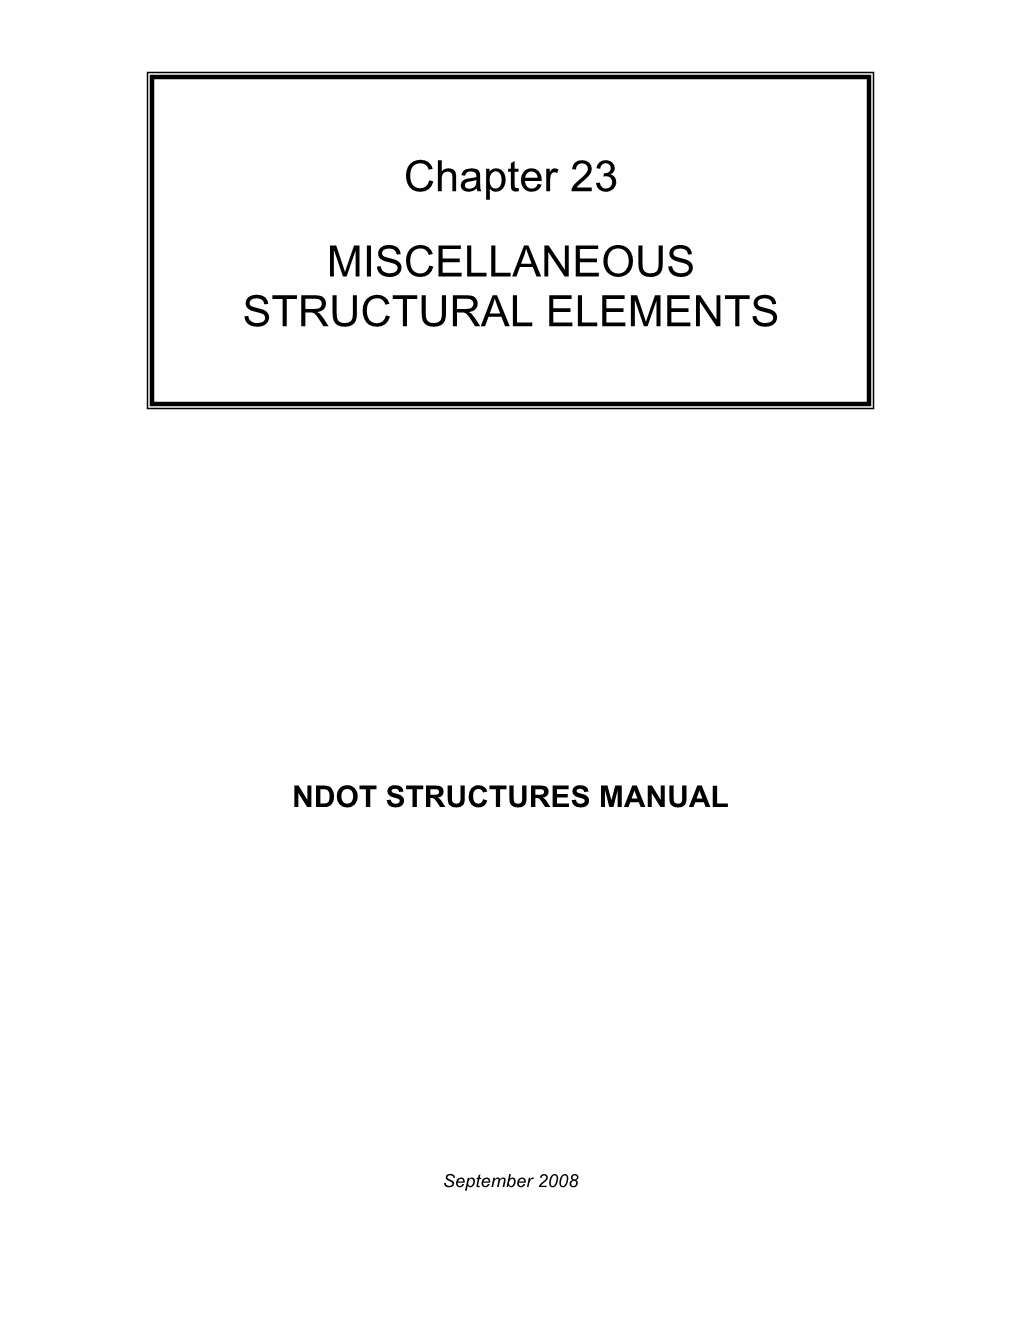 Ndot Structures Manual